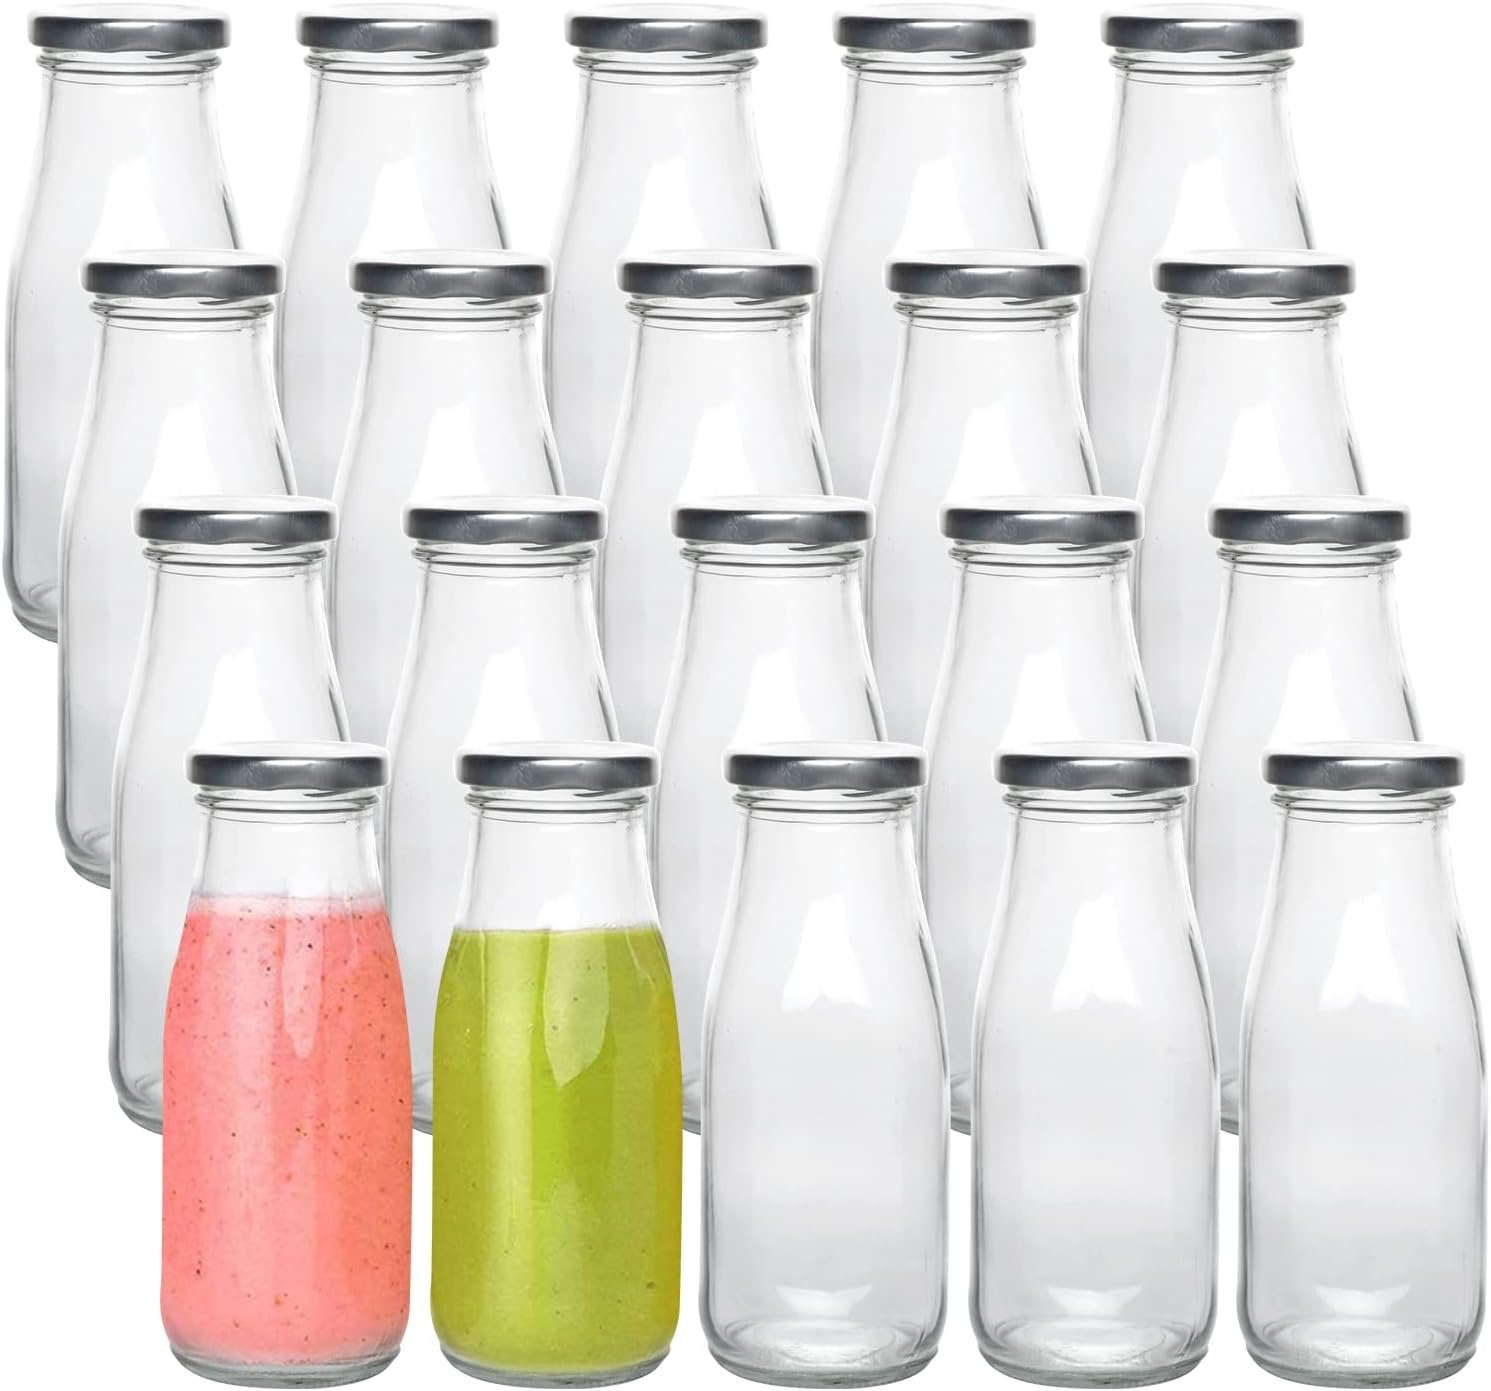 12 oz Glass Bottles, Clear Glass Milk Bottles with Silver Metal Airtight Lids, V